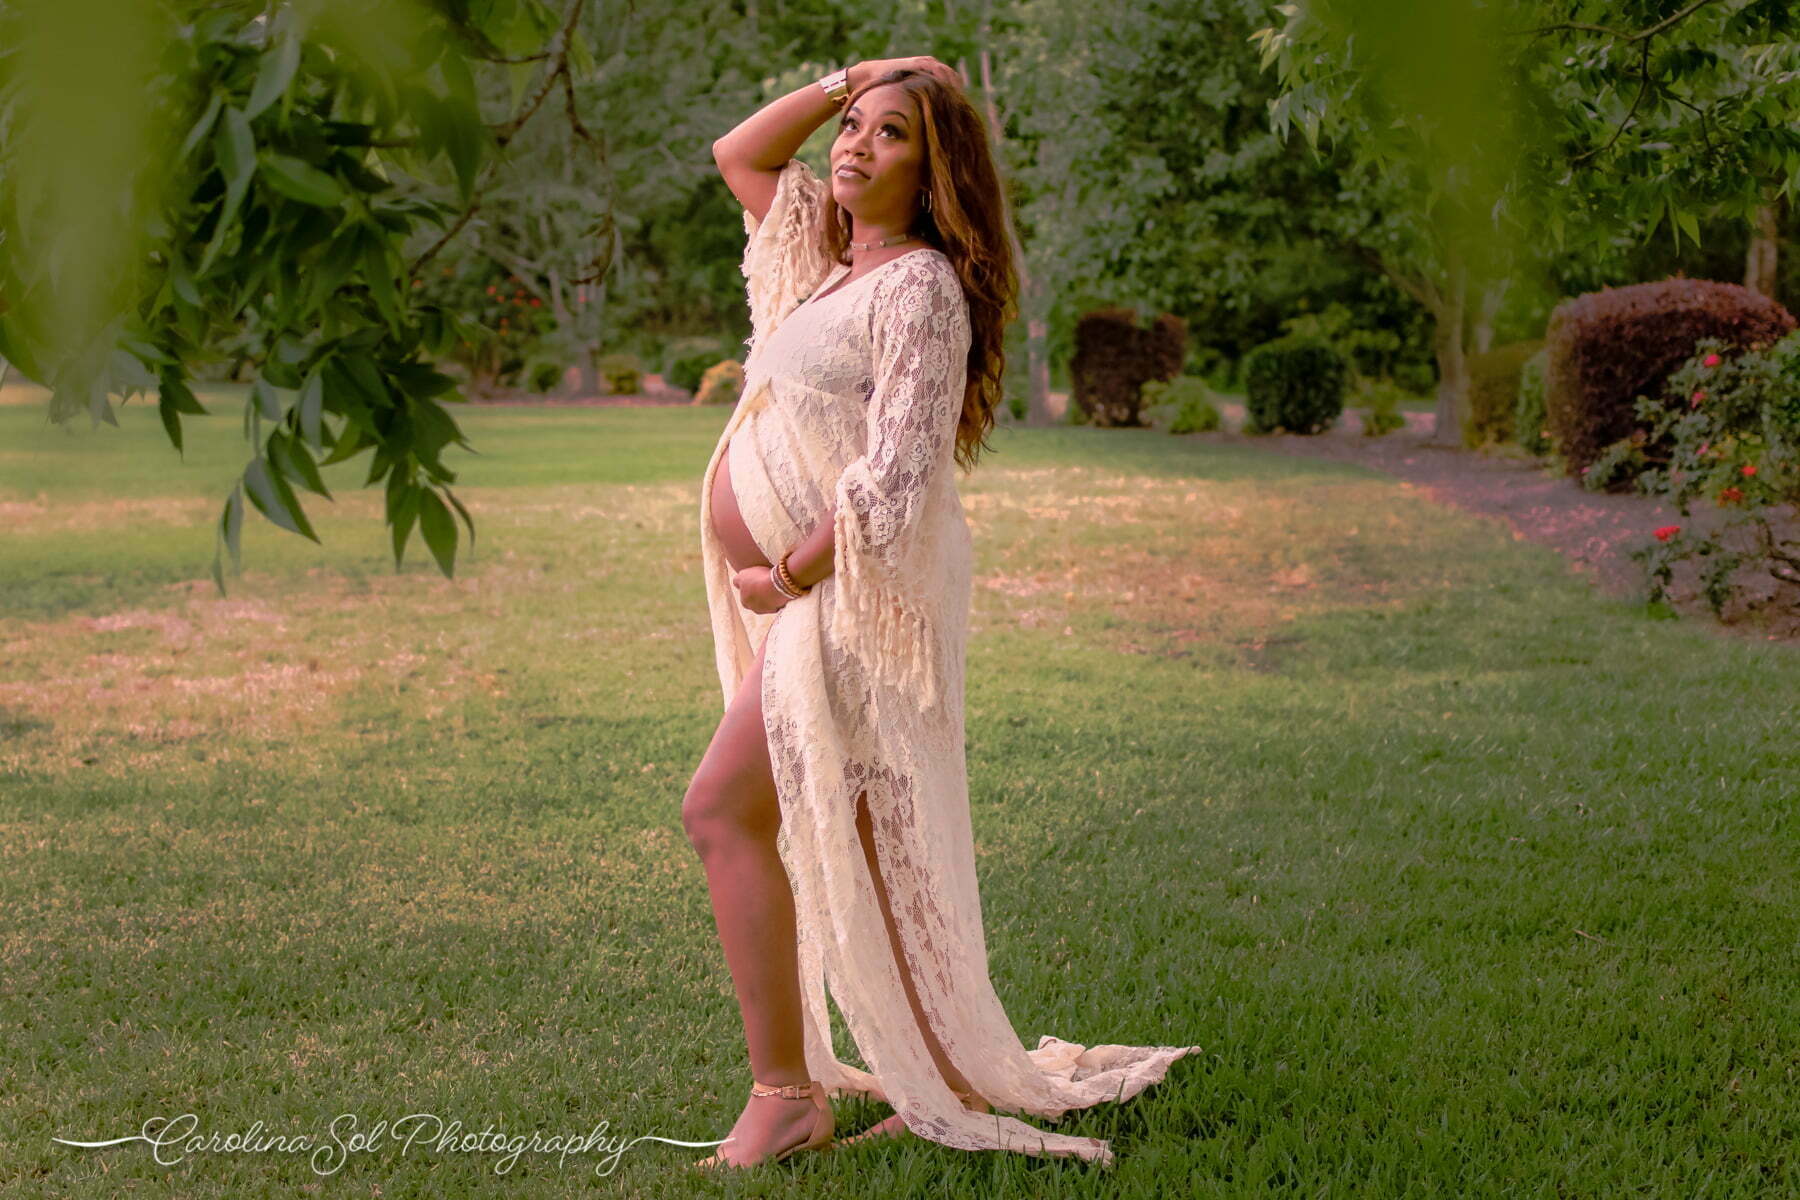 Maternity photography session in Shallotte, NC.